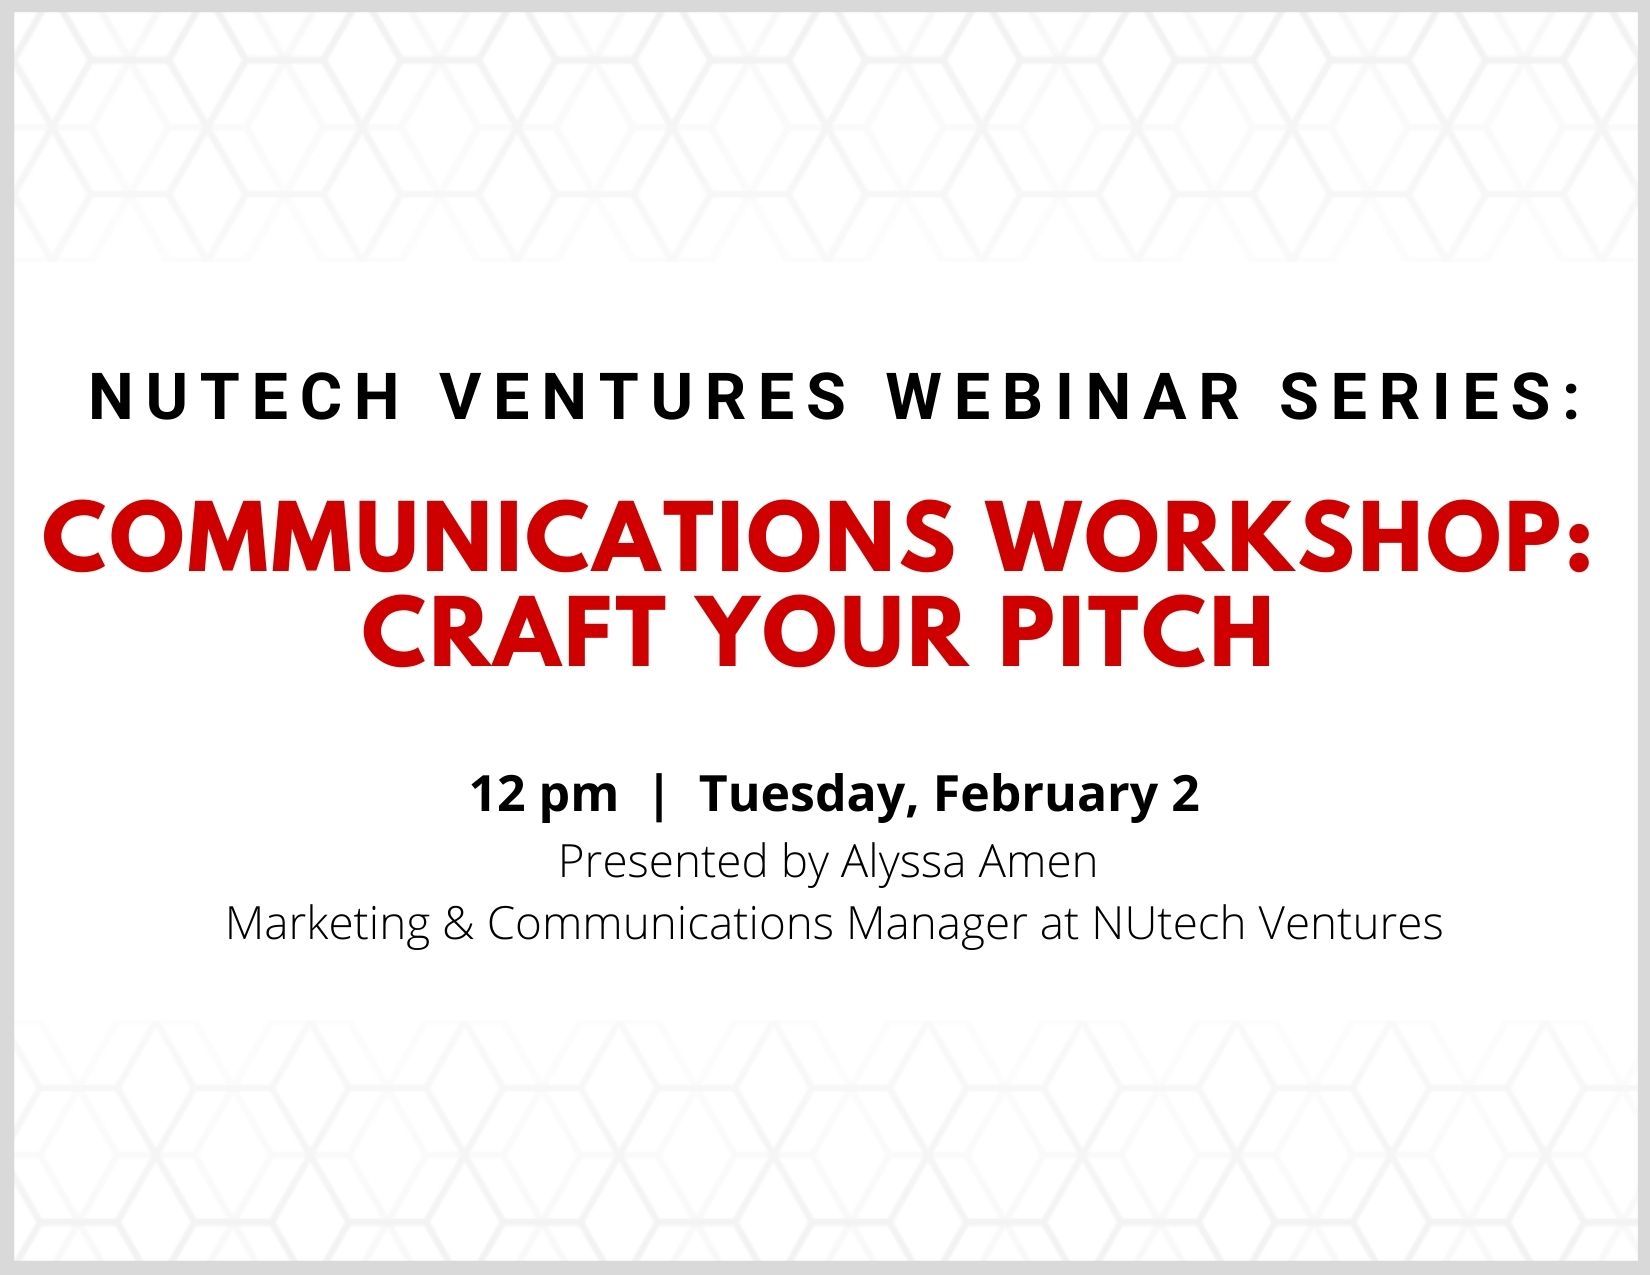 Learn more and register at go.unl.edu/craftyourpitch.